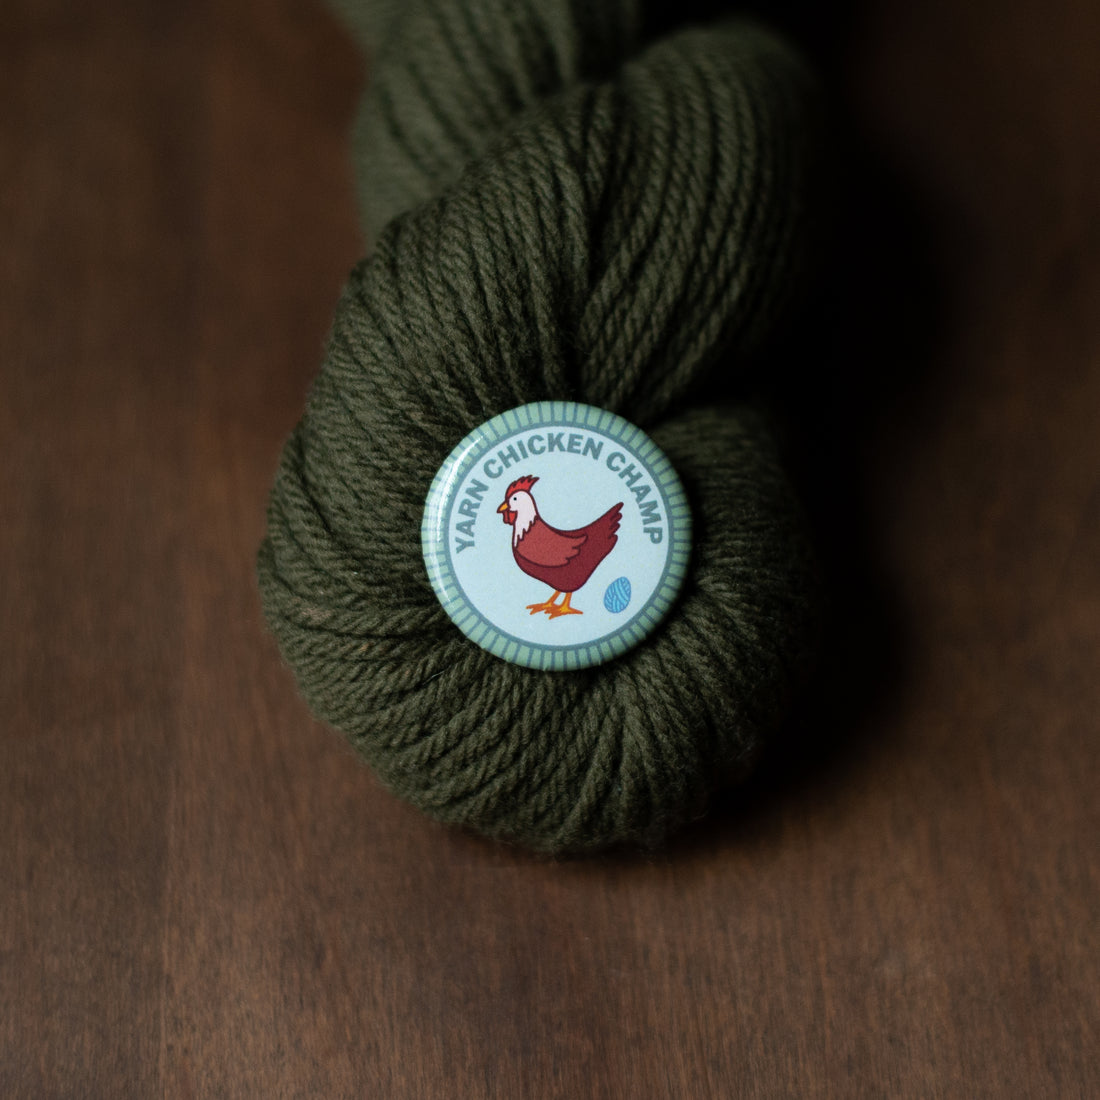 Badges to Earn:  Yarn Chicken Champ, Castonitis, Pom Pom Perfectionist